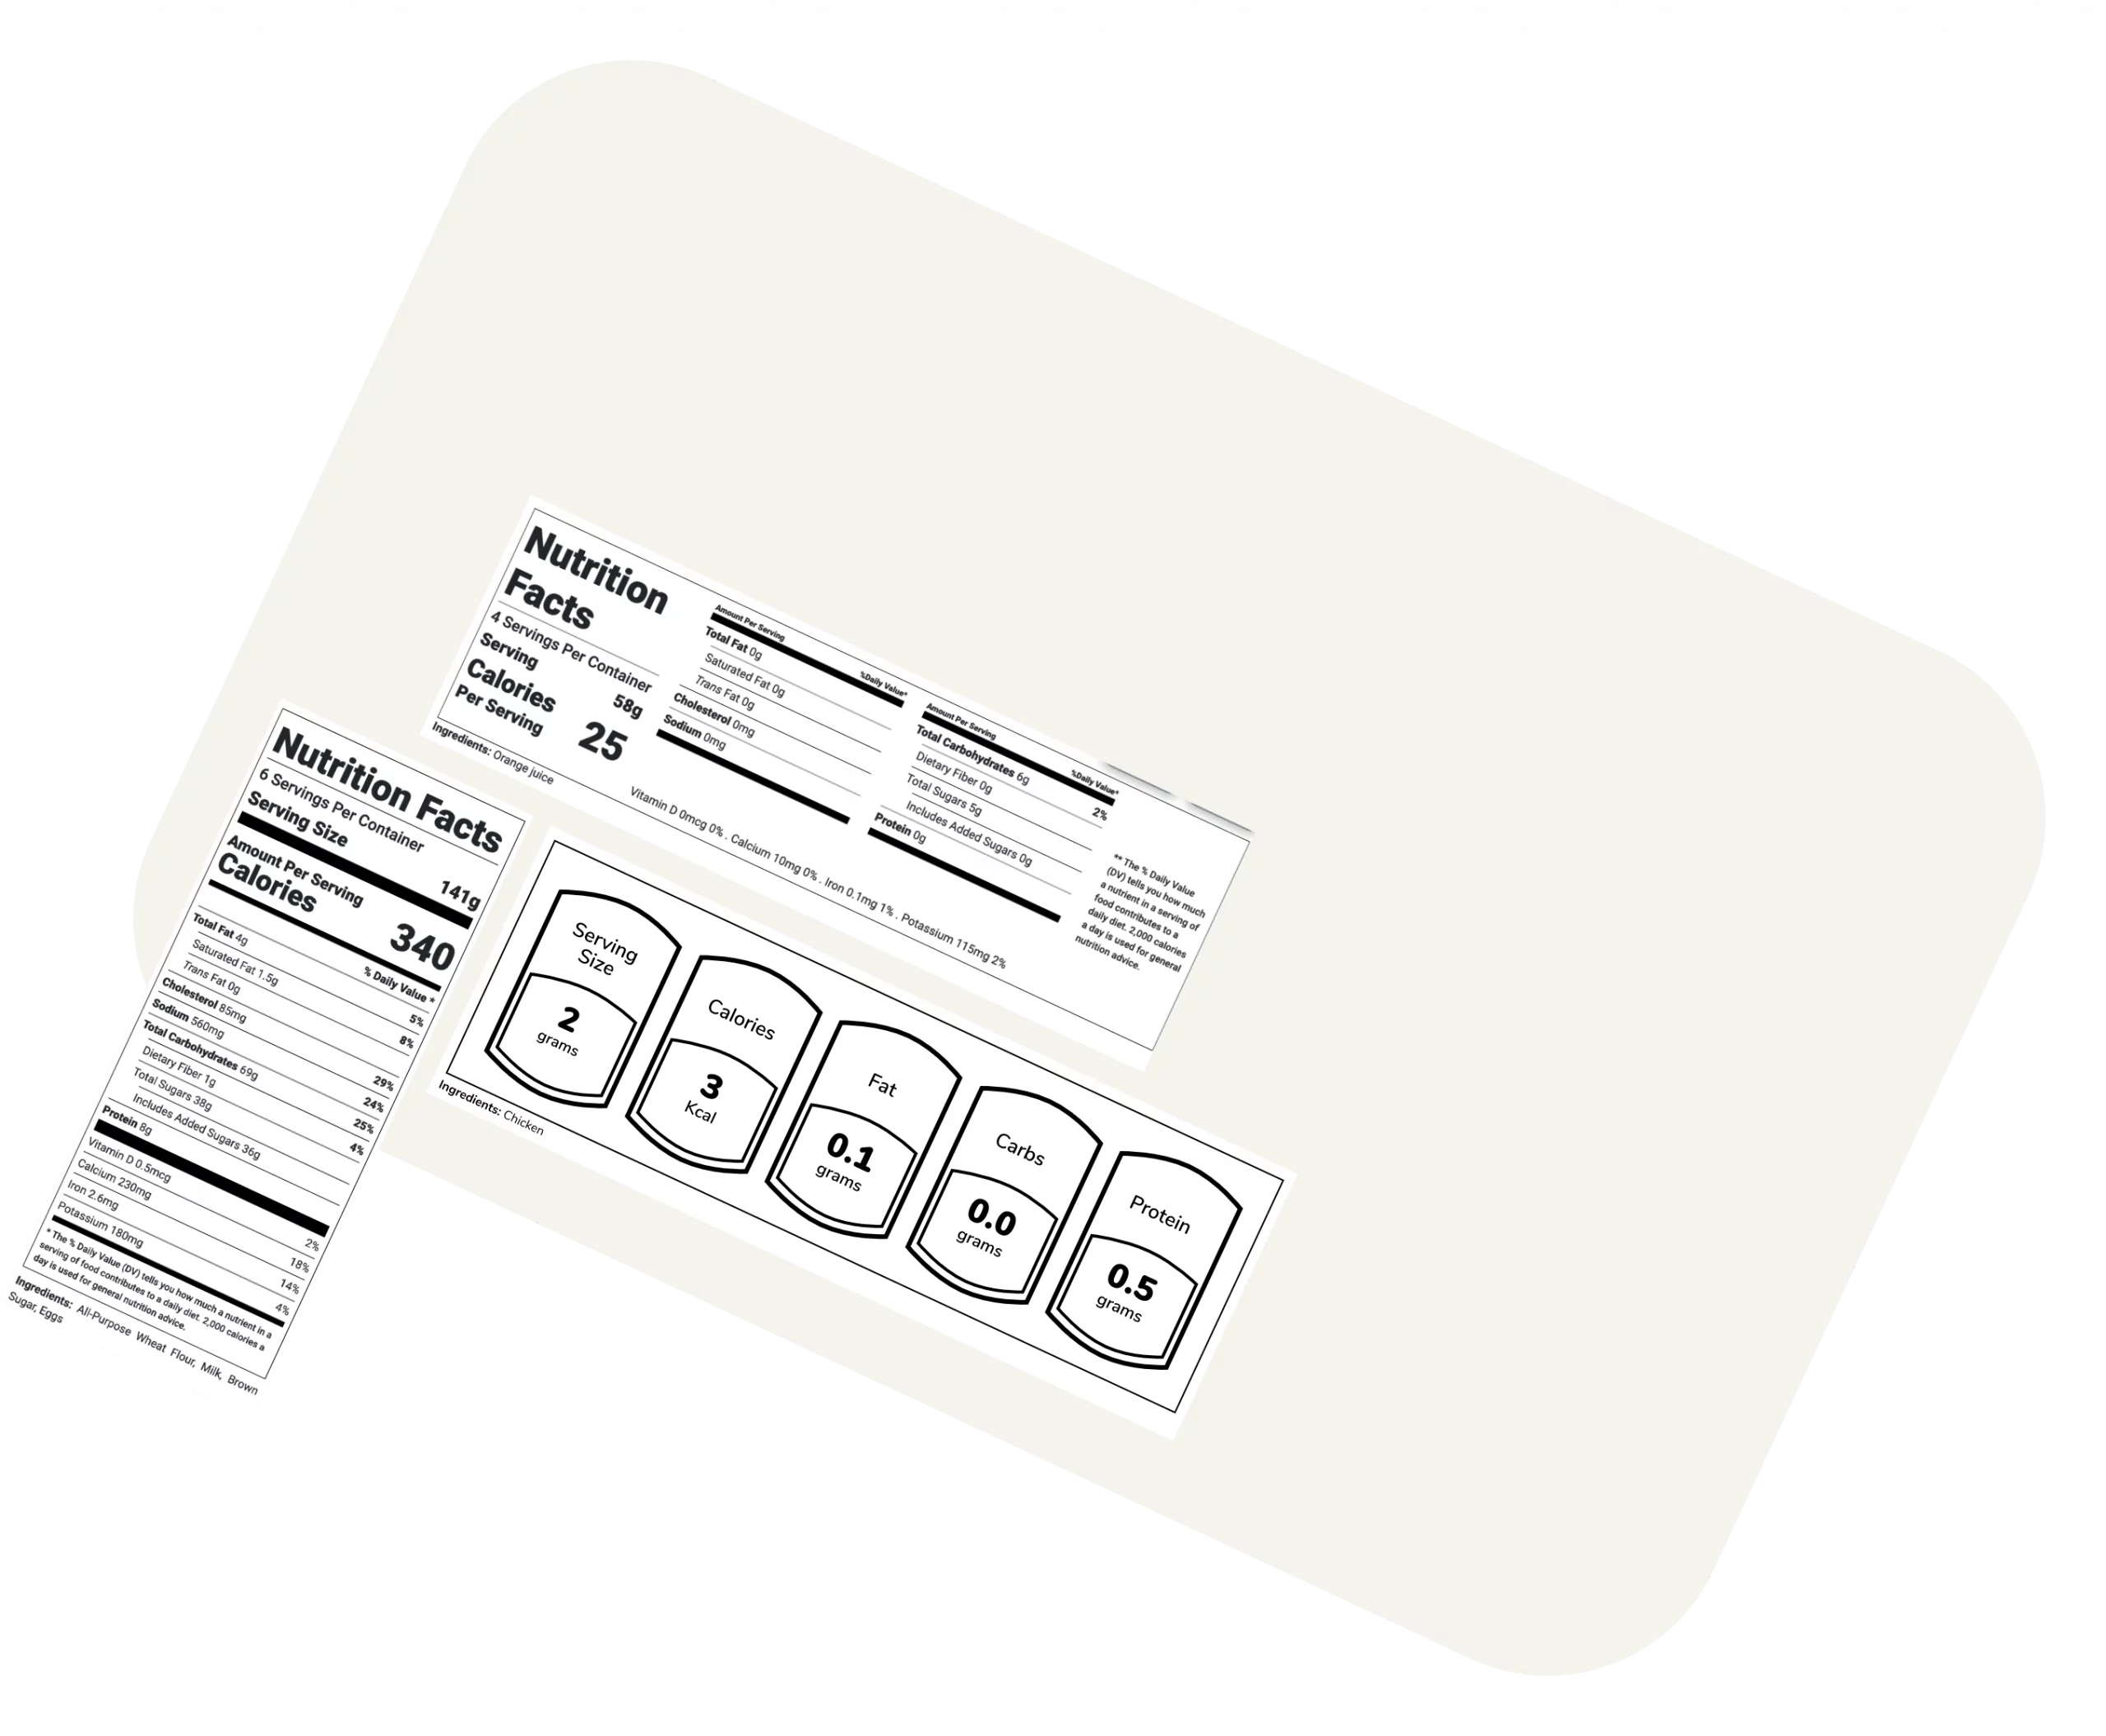 A cream rectangle with rounded edges is diagonally placed across a grey background. Two white labels are on the bottom left-hand side that have nutrition facts and information displayed across it. Another white rectangular label has nutrition amounts written on top of those.